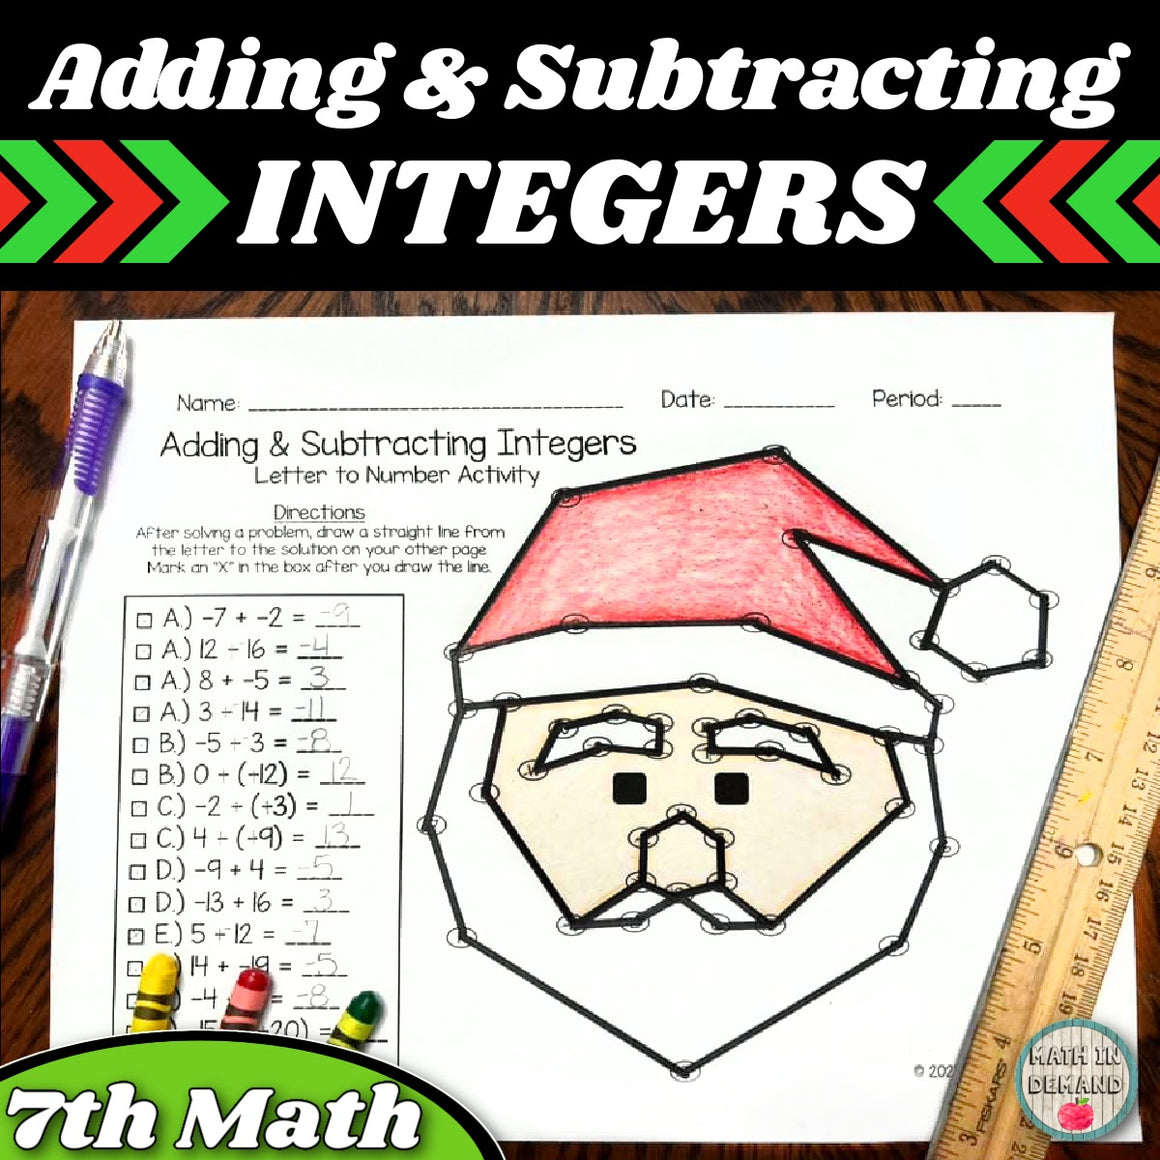 Adding & Subtracting Integers Letter to Number Christmas Activity